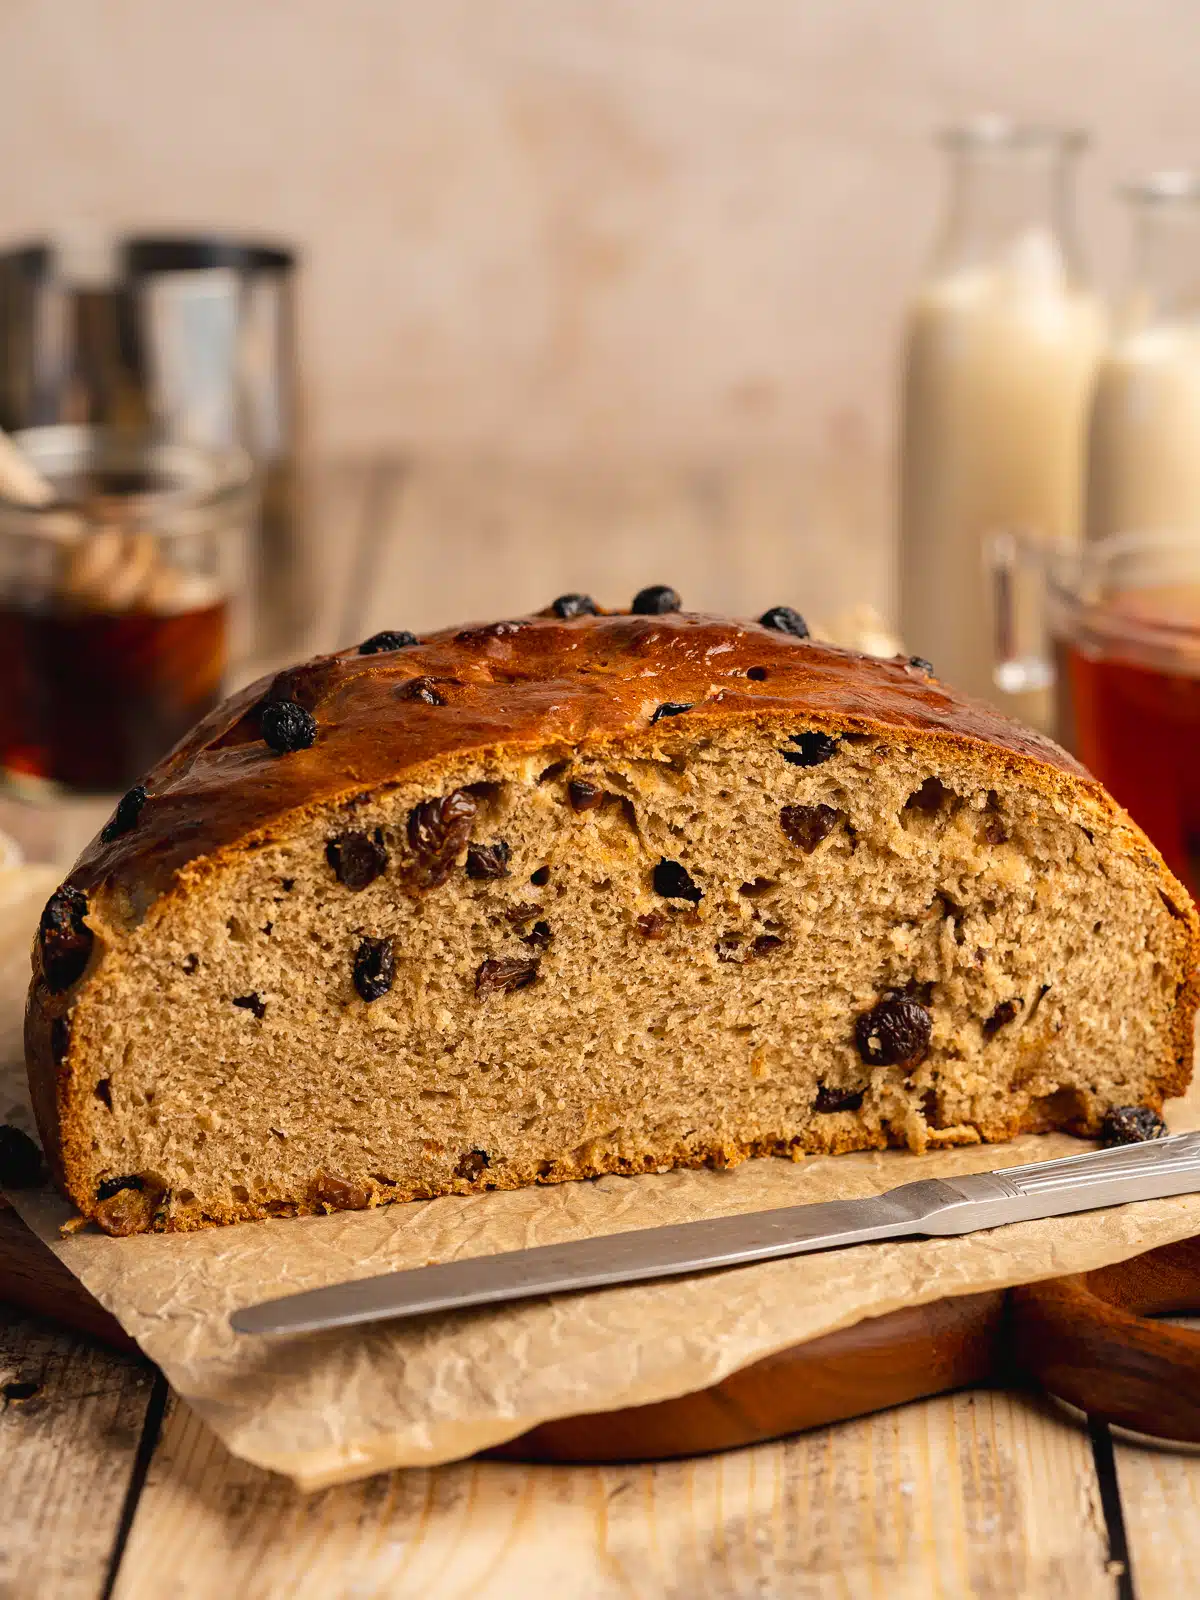 half a loaf of barmbrack on a cutting board with a cross section showing the dried fruit and fluffy texture inside.